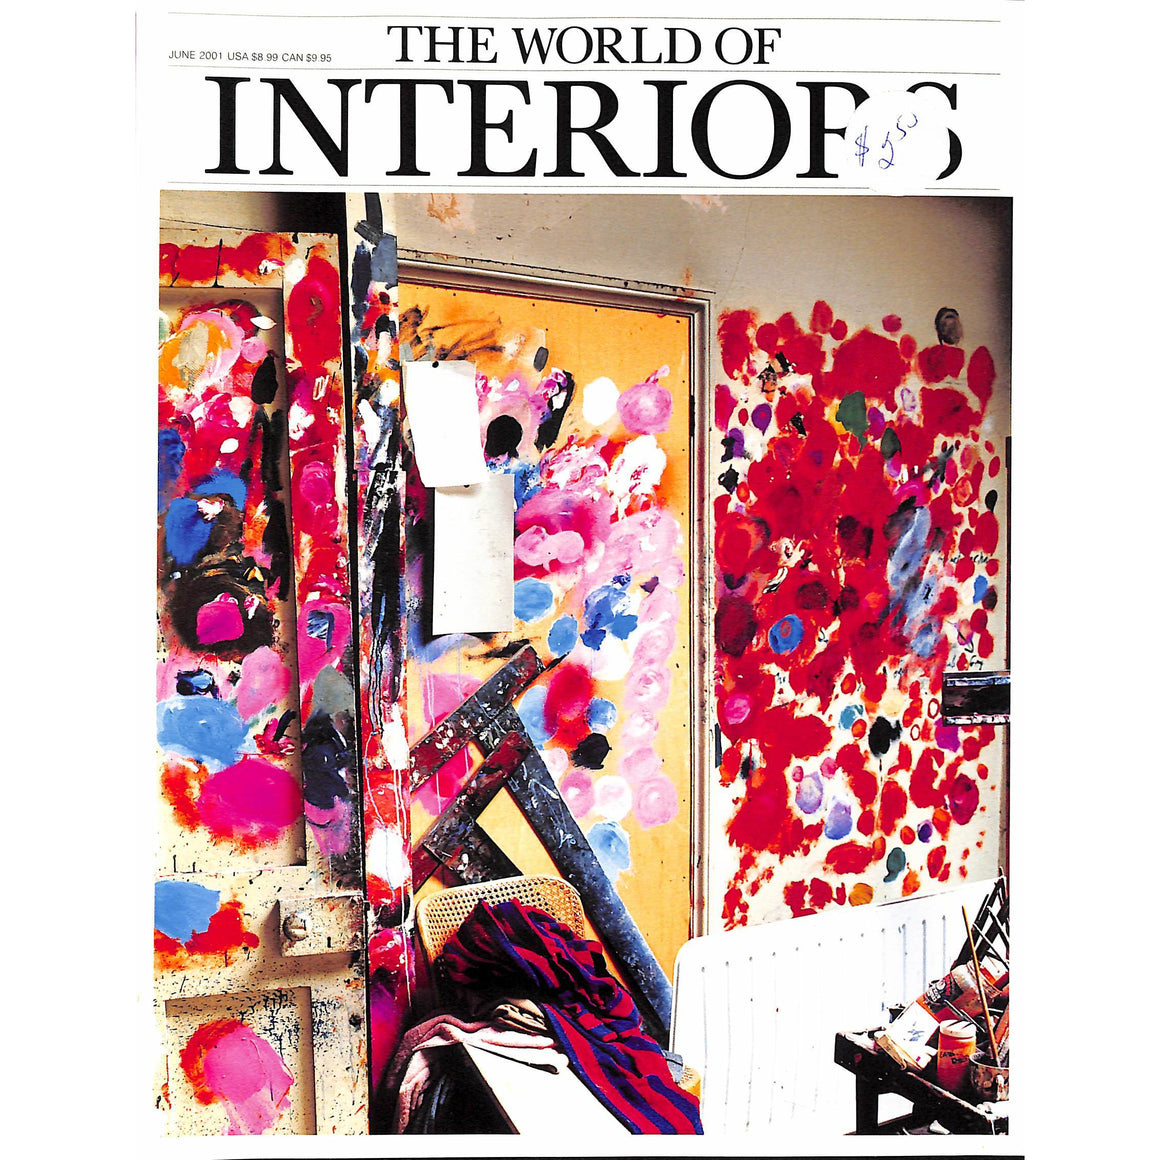 The World Of Interiors June 2001 (SOLD)